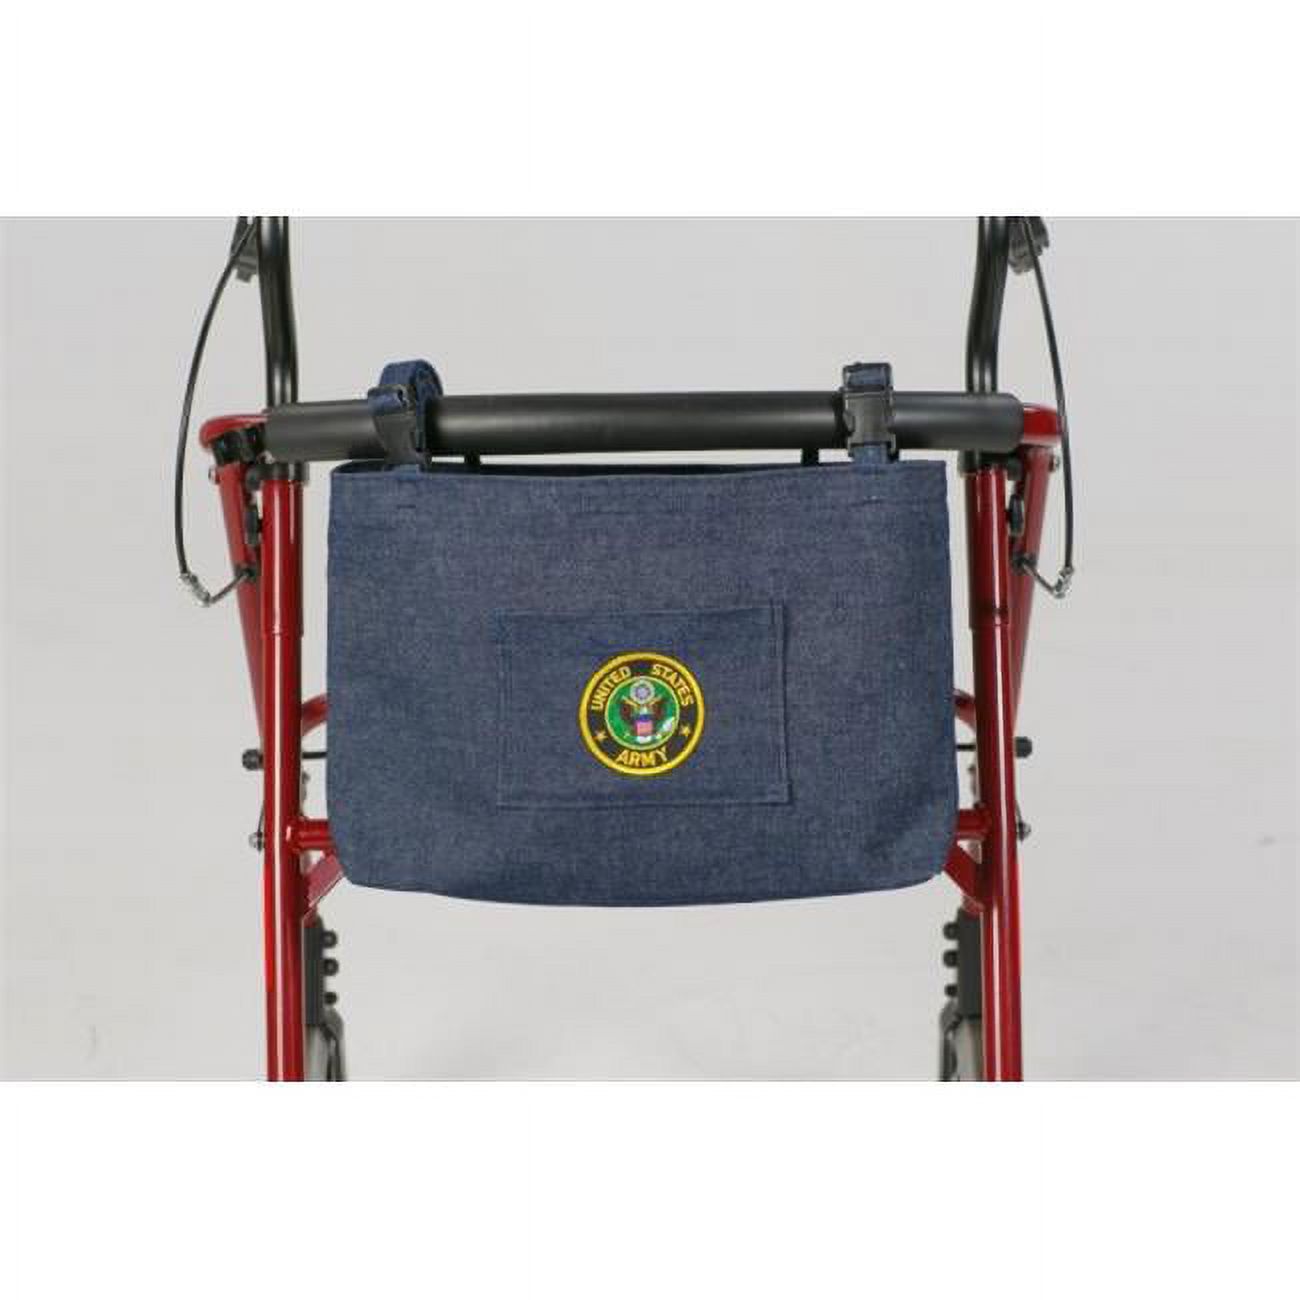 Granny Jo Products 1307 US Army Wheelchair Bag - image 1 of 1